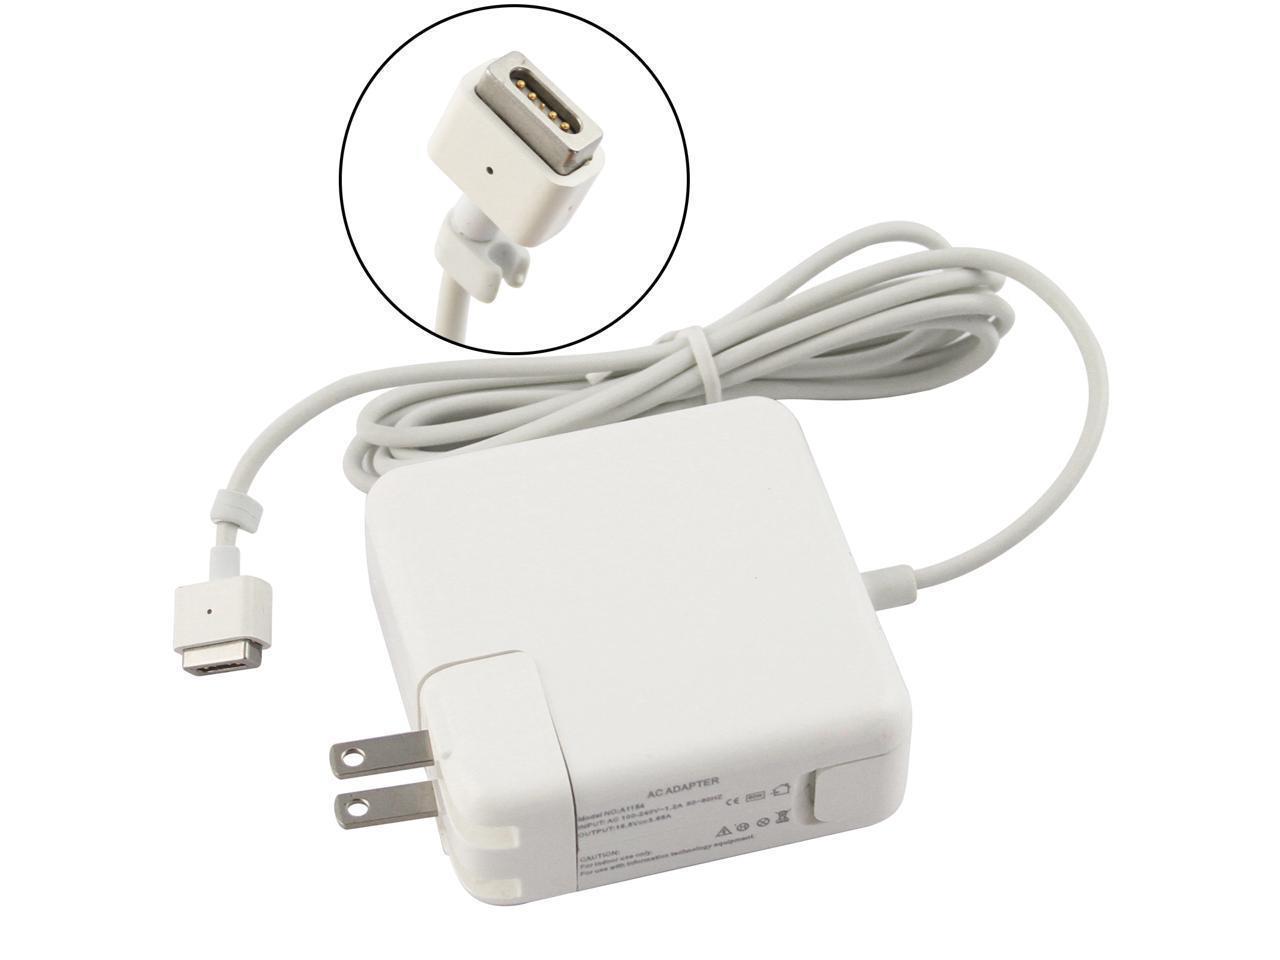 macbook a1181 charger